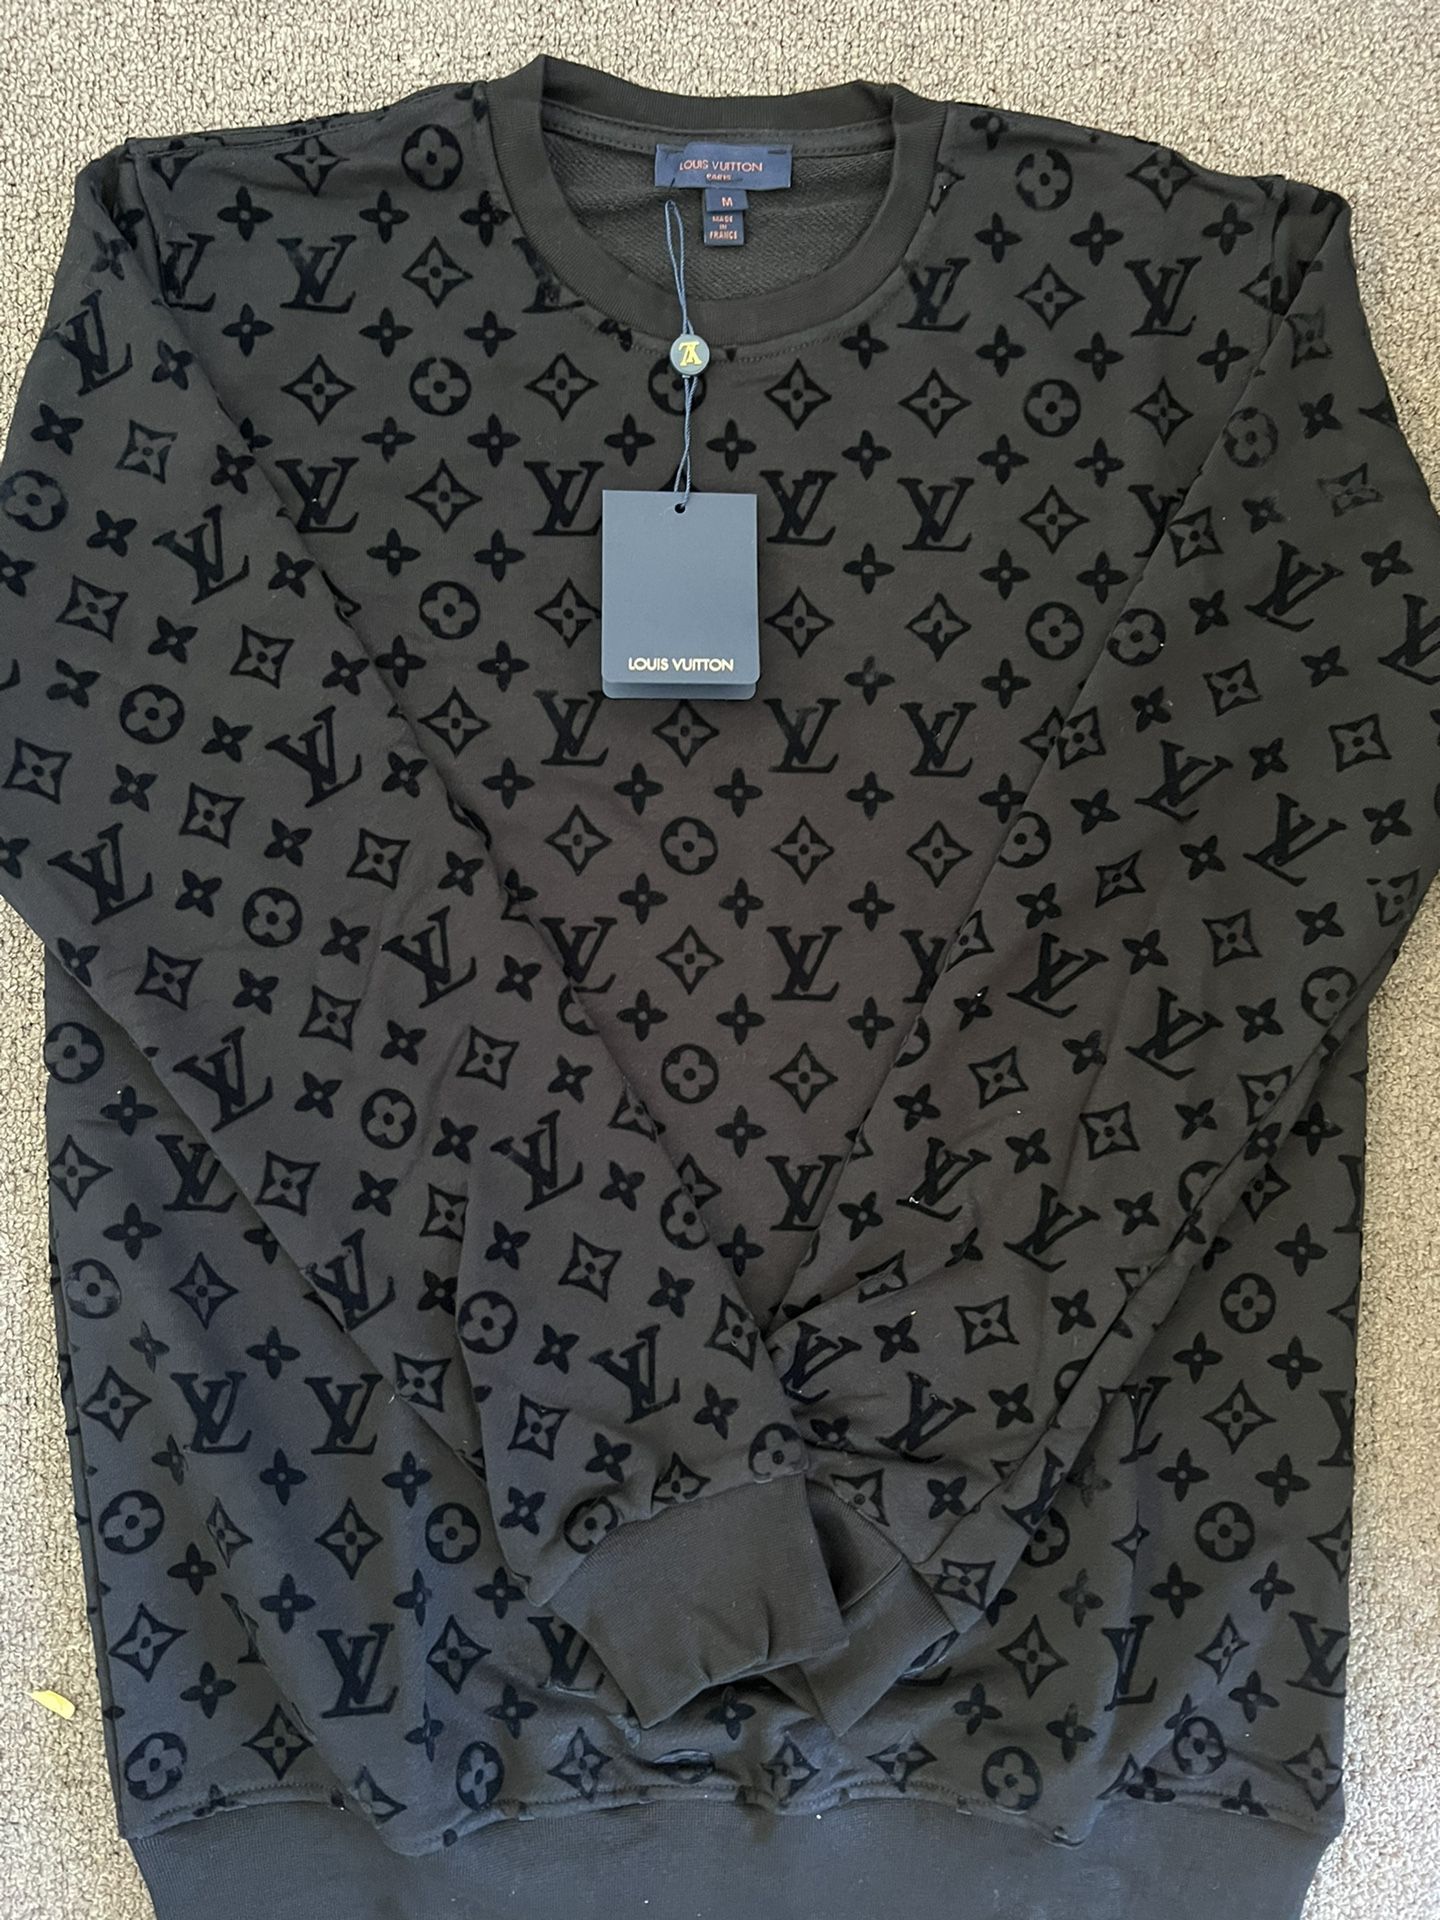 L.ouisV Sweatshirt. All Sizes Available . 2 For $160